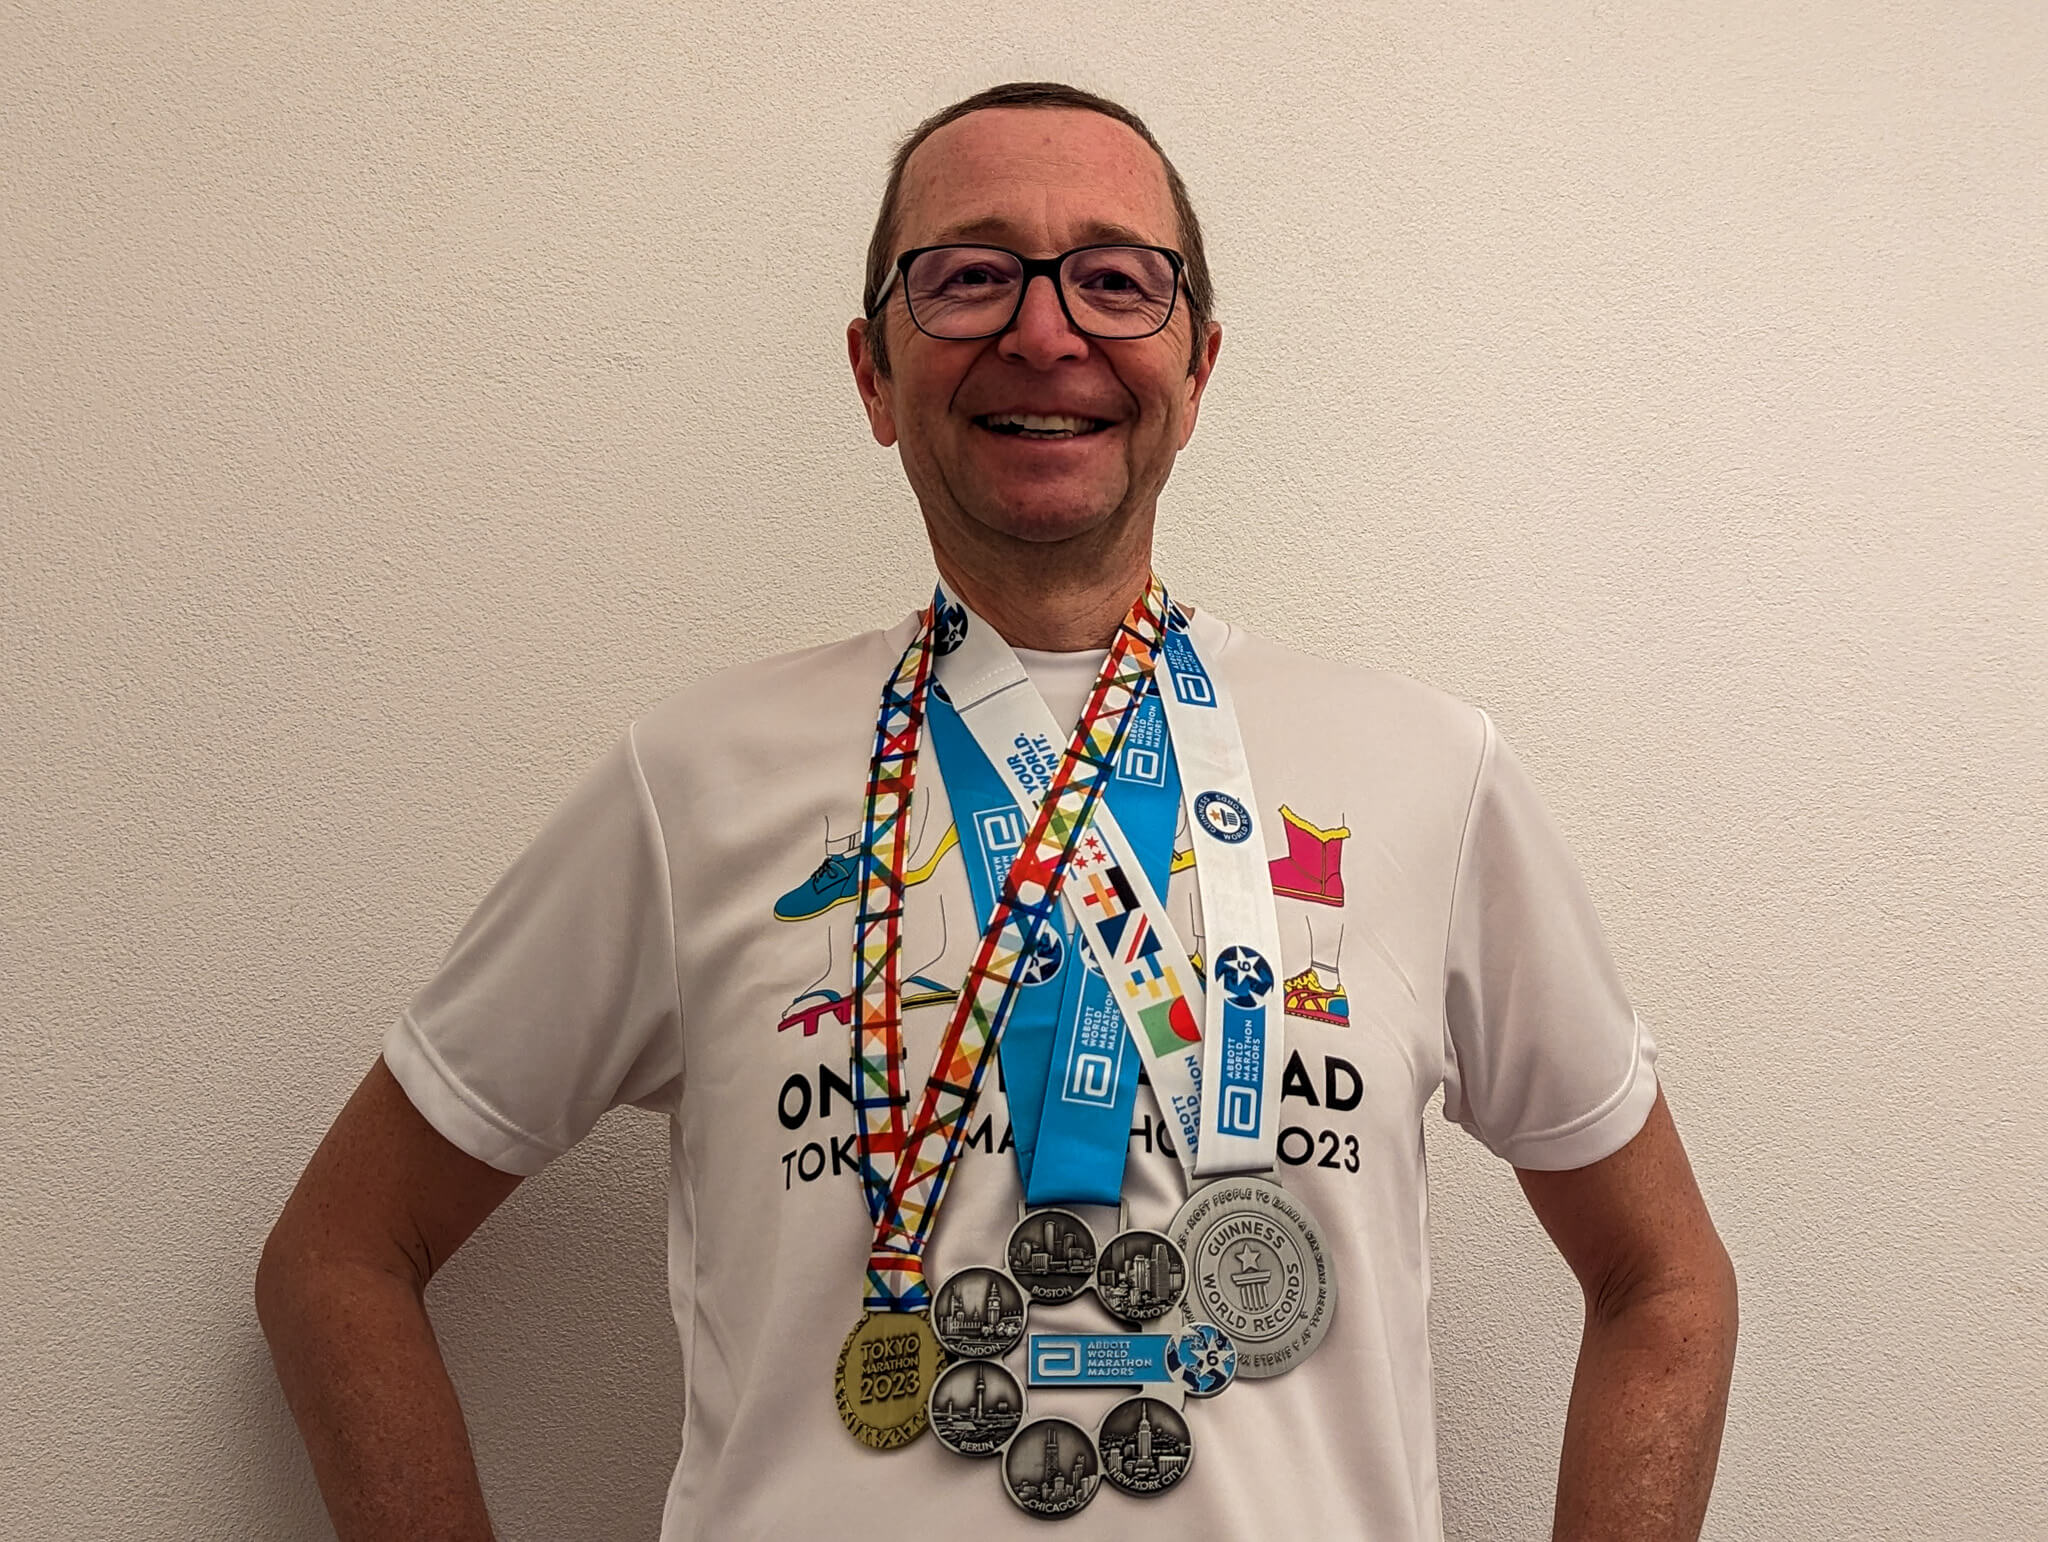 Author with Toyko Marathon finisher shirt & medal, plus six star medal and world record medal